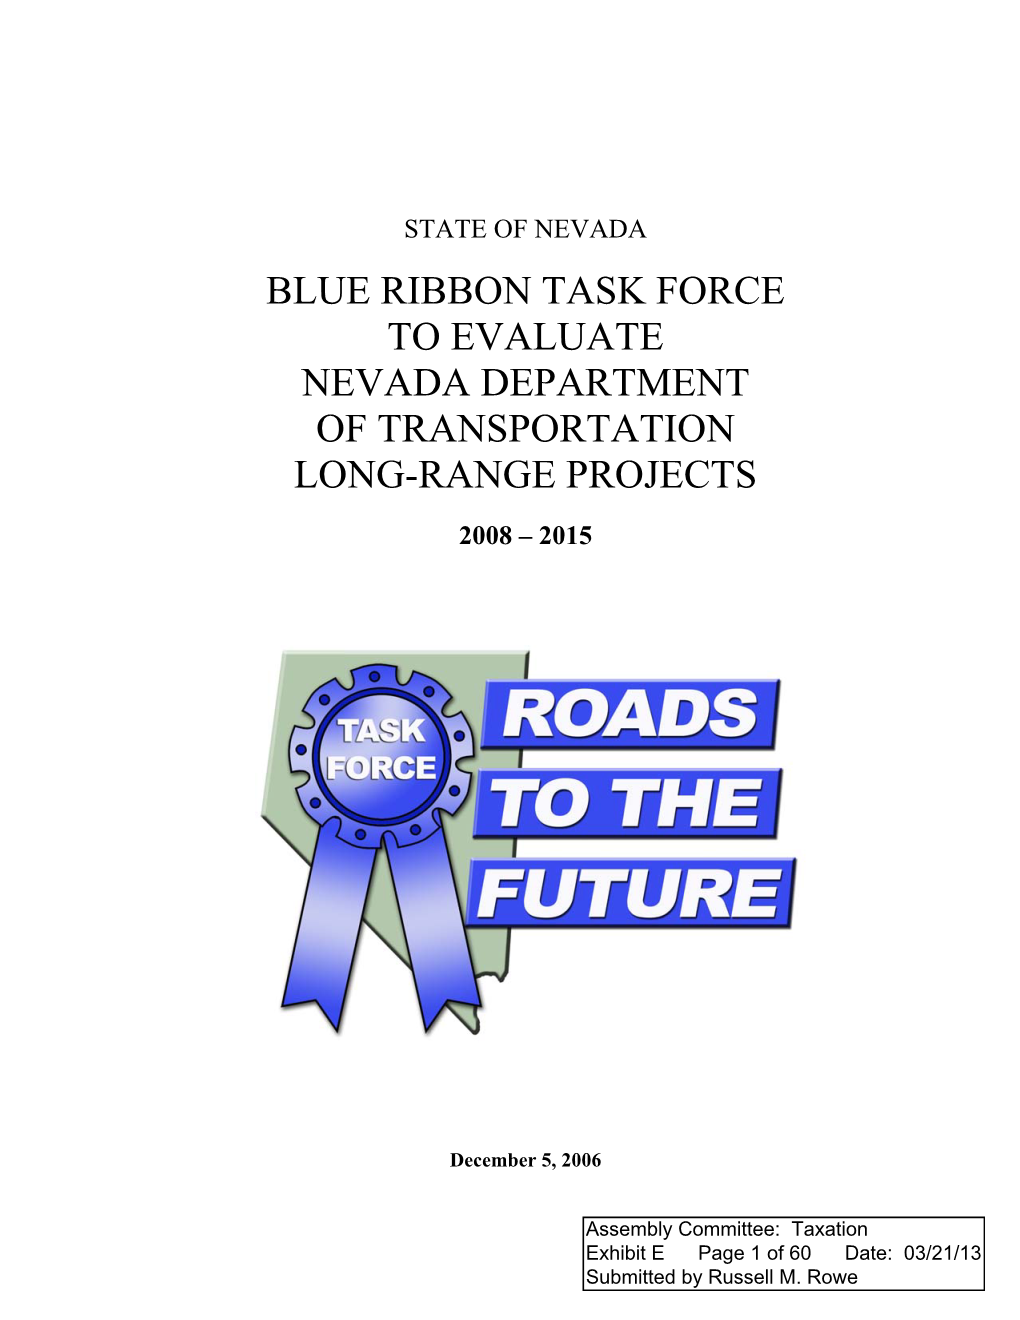 Blue Ribbon Task Force to Evaluate Nevada Department of Transportation Long-Range Projects 2008-2015